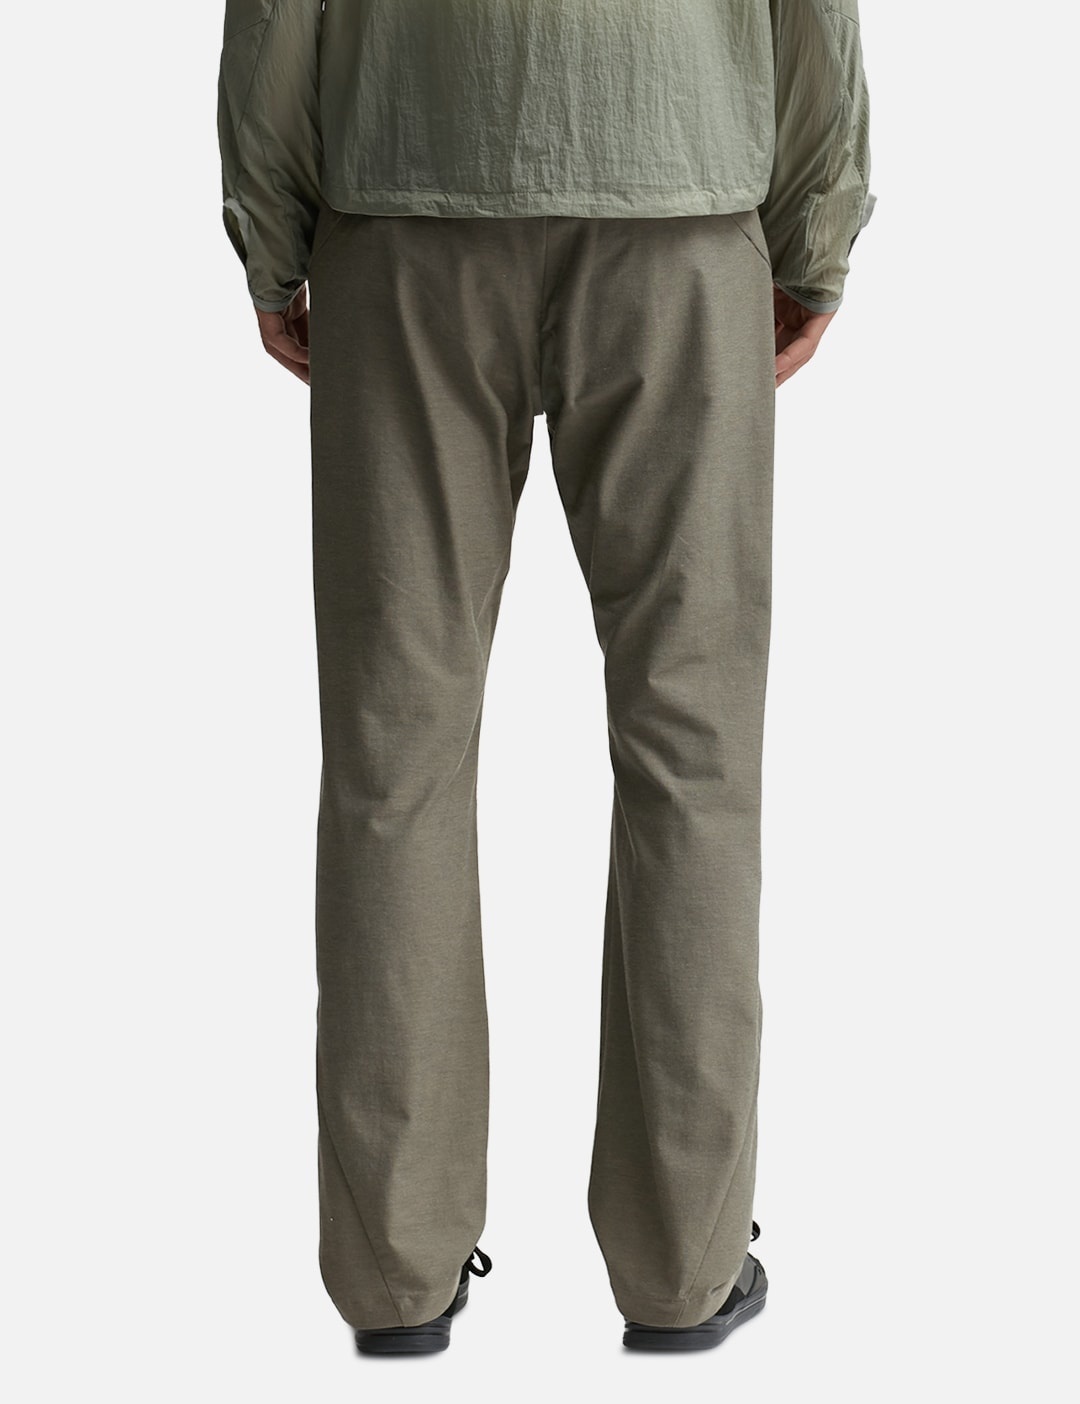 5.1 TECHNICAL PANTS RIGHT - 5